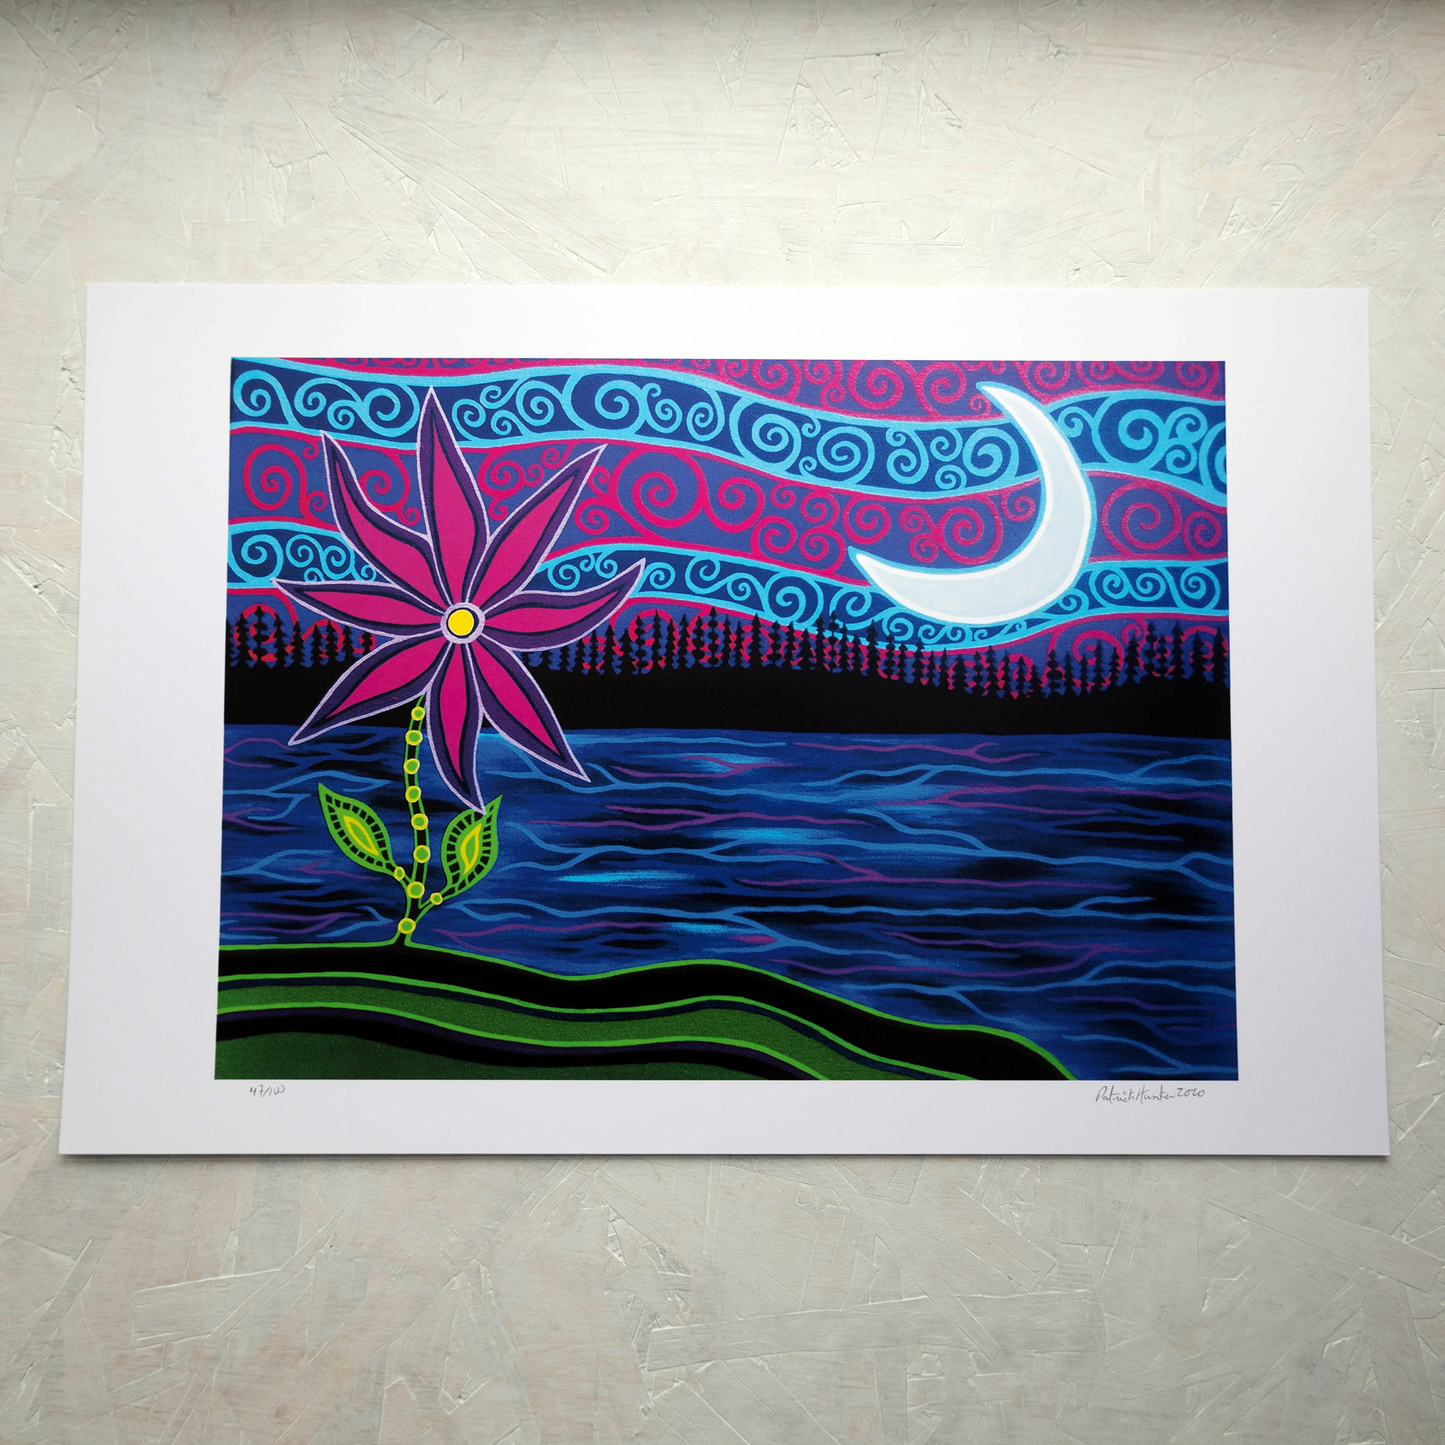 Print of Patrick Hunter's painting of a bright pink daisy against a background of lake, trees, and crescent moon, woodland art style.